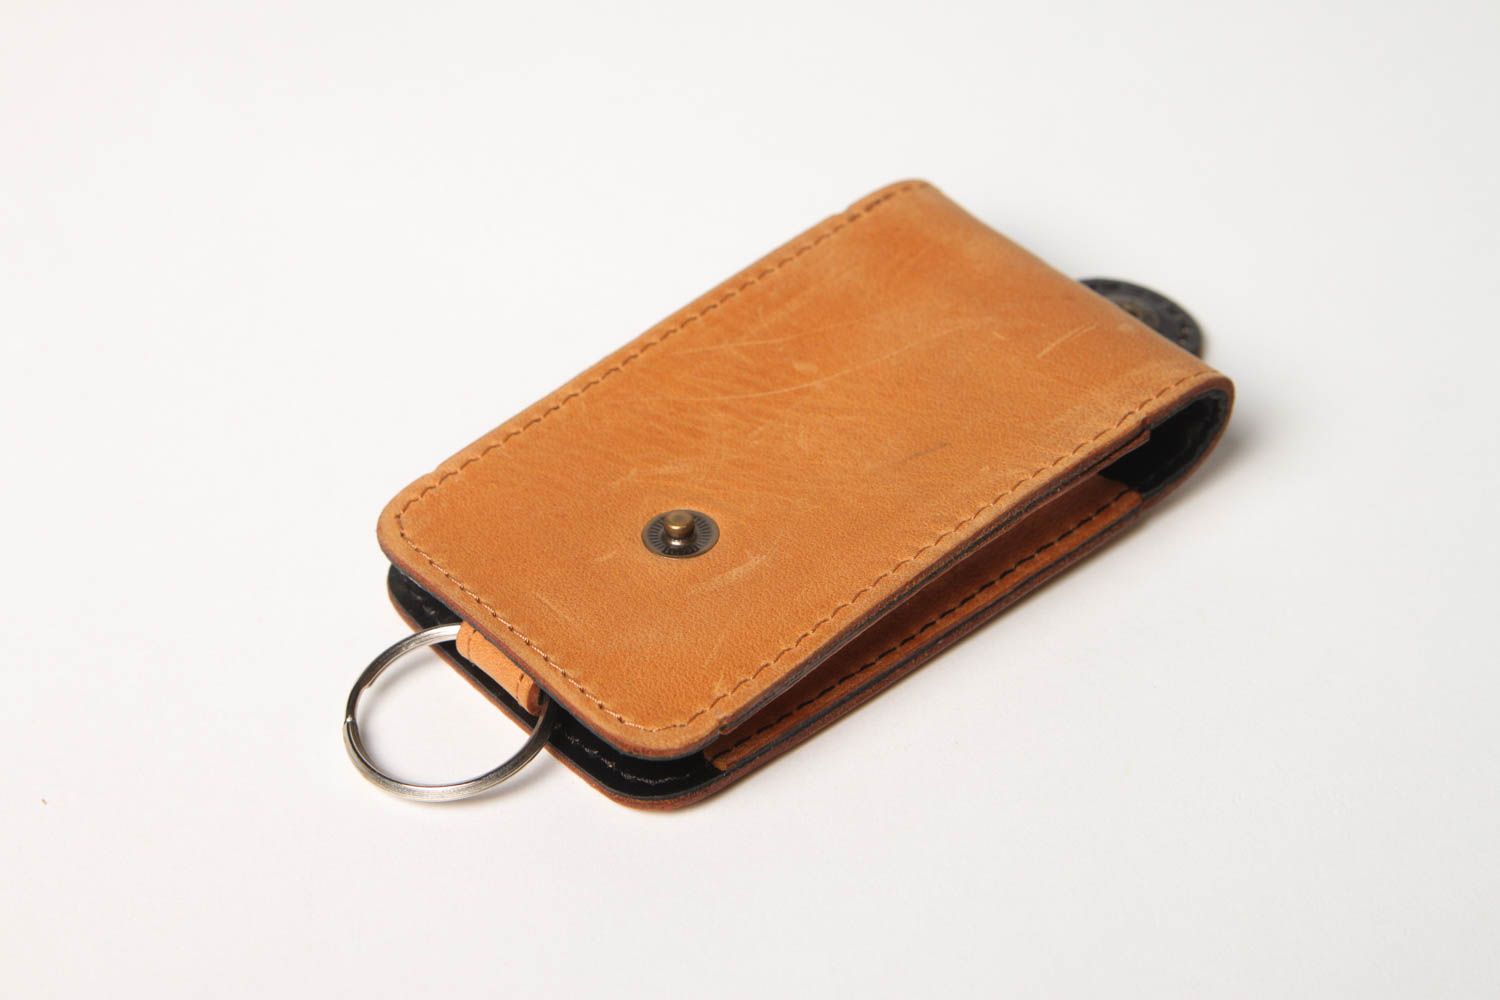 Key Holder | Grey Buttero | Key Case | Pouch | Embossed | Customized | Personalized Handmade Leather | Made to Order